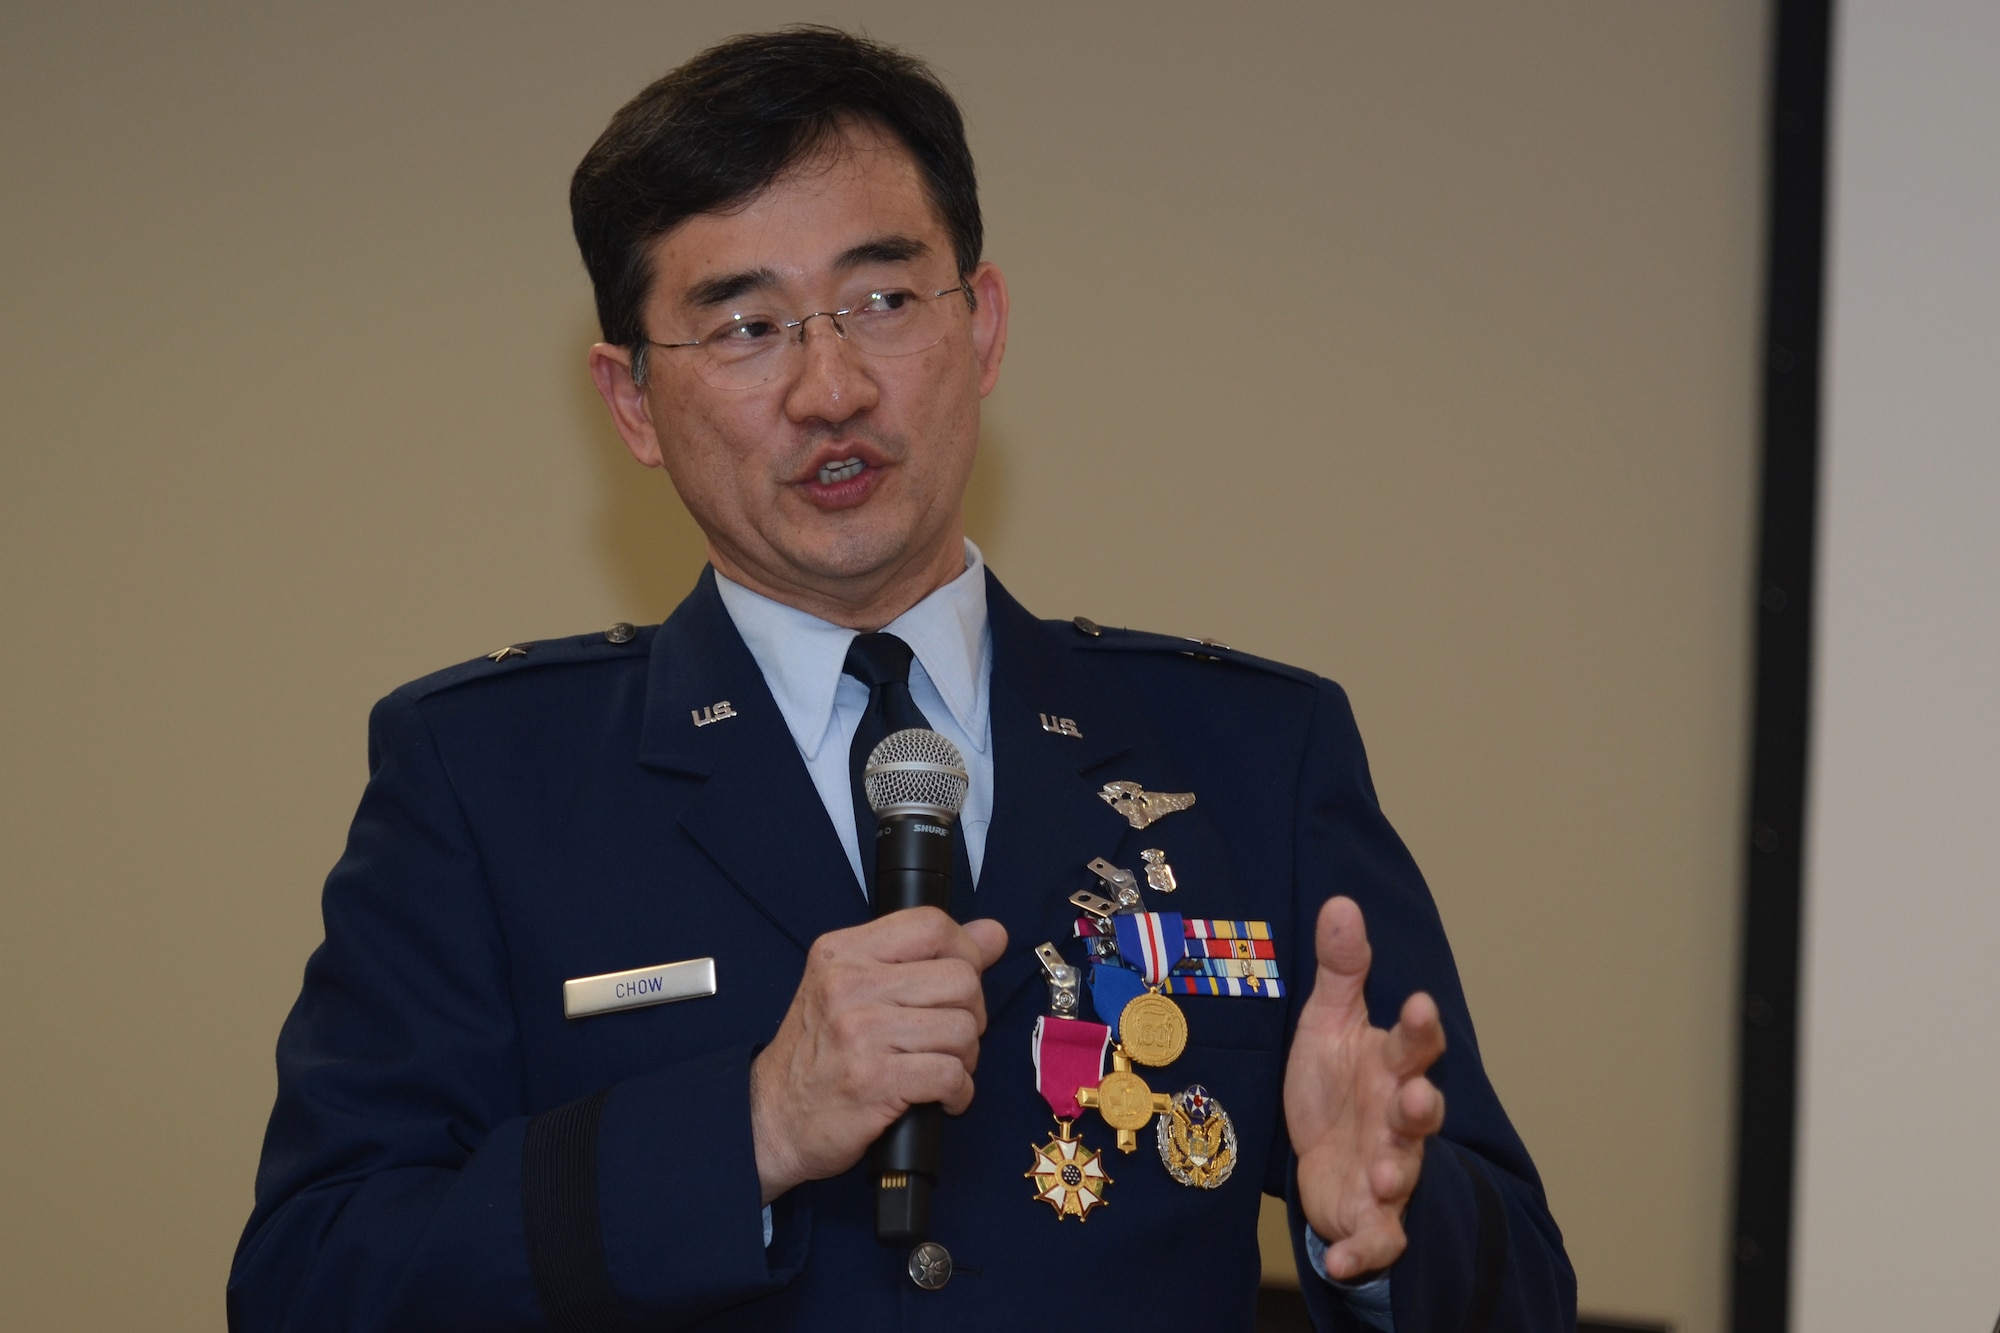 U.S. Air Force Brig. Gen. (Dr.) Jim Chow speaks to an audience of family and friends during his retirement ceremony. The South Carolina Air National Guard and the 169th Fighter Wing at McEntire Joint National Guard Base celebrates Brig. Gen. Chow’s thirty years of service during a retirement ceremony, Feb. 8, 2015. Brig. Gen. Chow served as a flight surgeon for the 169th Fighter Wing and recently as the State Air Surgeon and Assistant to the Director of the Air National Guard.  (U.S. Air National Guard photo by Senior Master Sgt. Edward Snyder/Released)